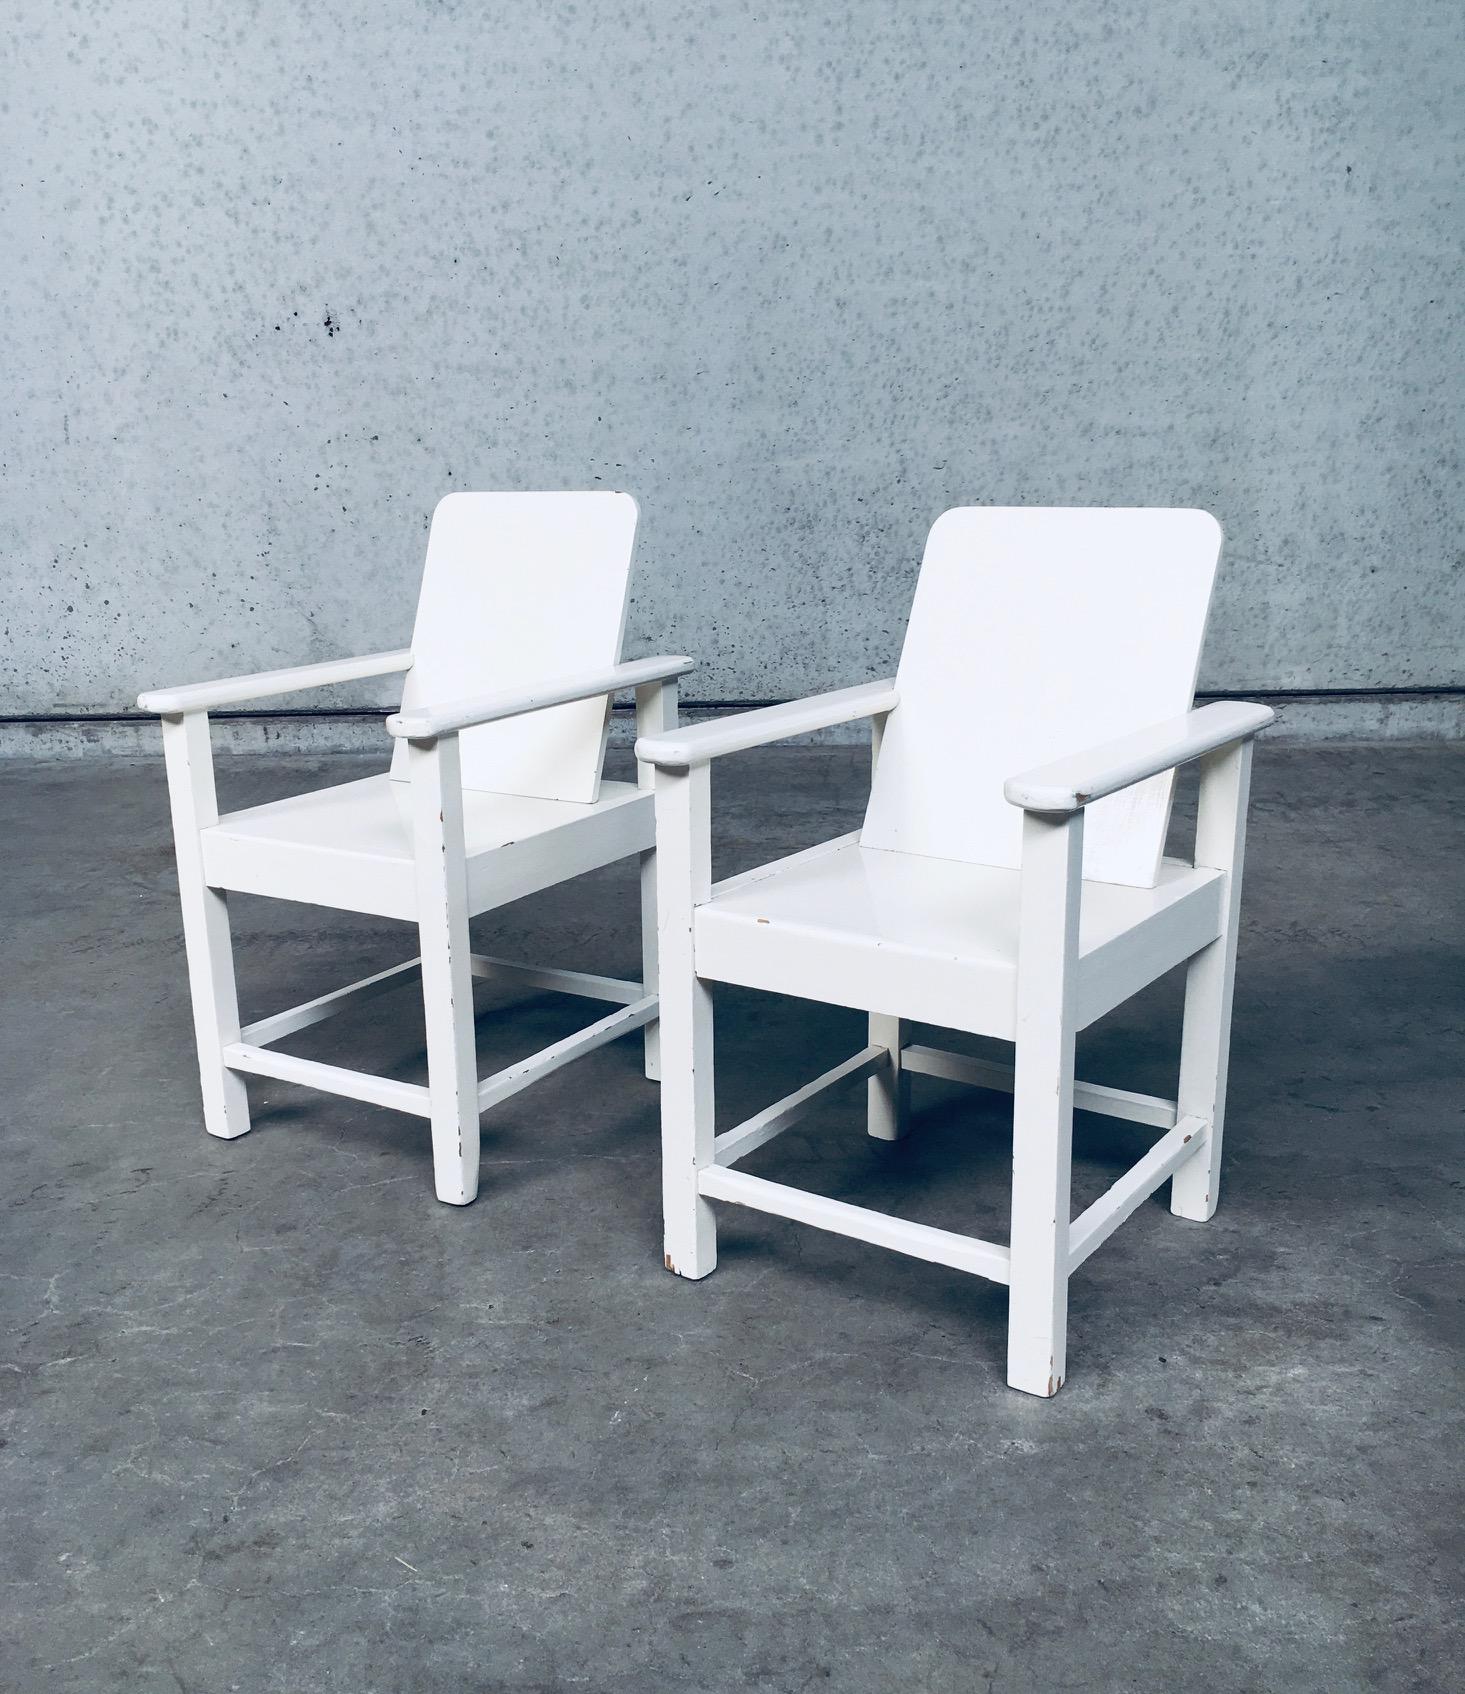 Vintage Early 20th Century Art Deco Period Handmade hand crafted Childs Size Arm Chair set of 2. Made in Belgium, 1920's. Beech wood constructed chairs with a modernist / modernism style design. Painted with a thick layer of white gloss paint. Both